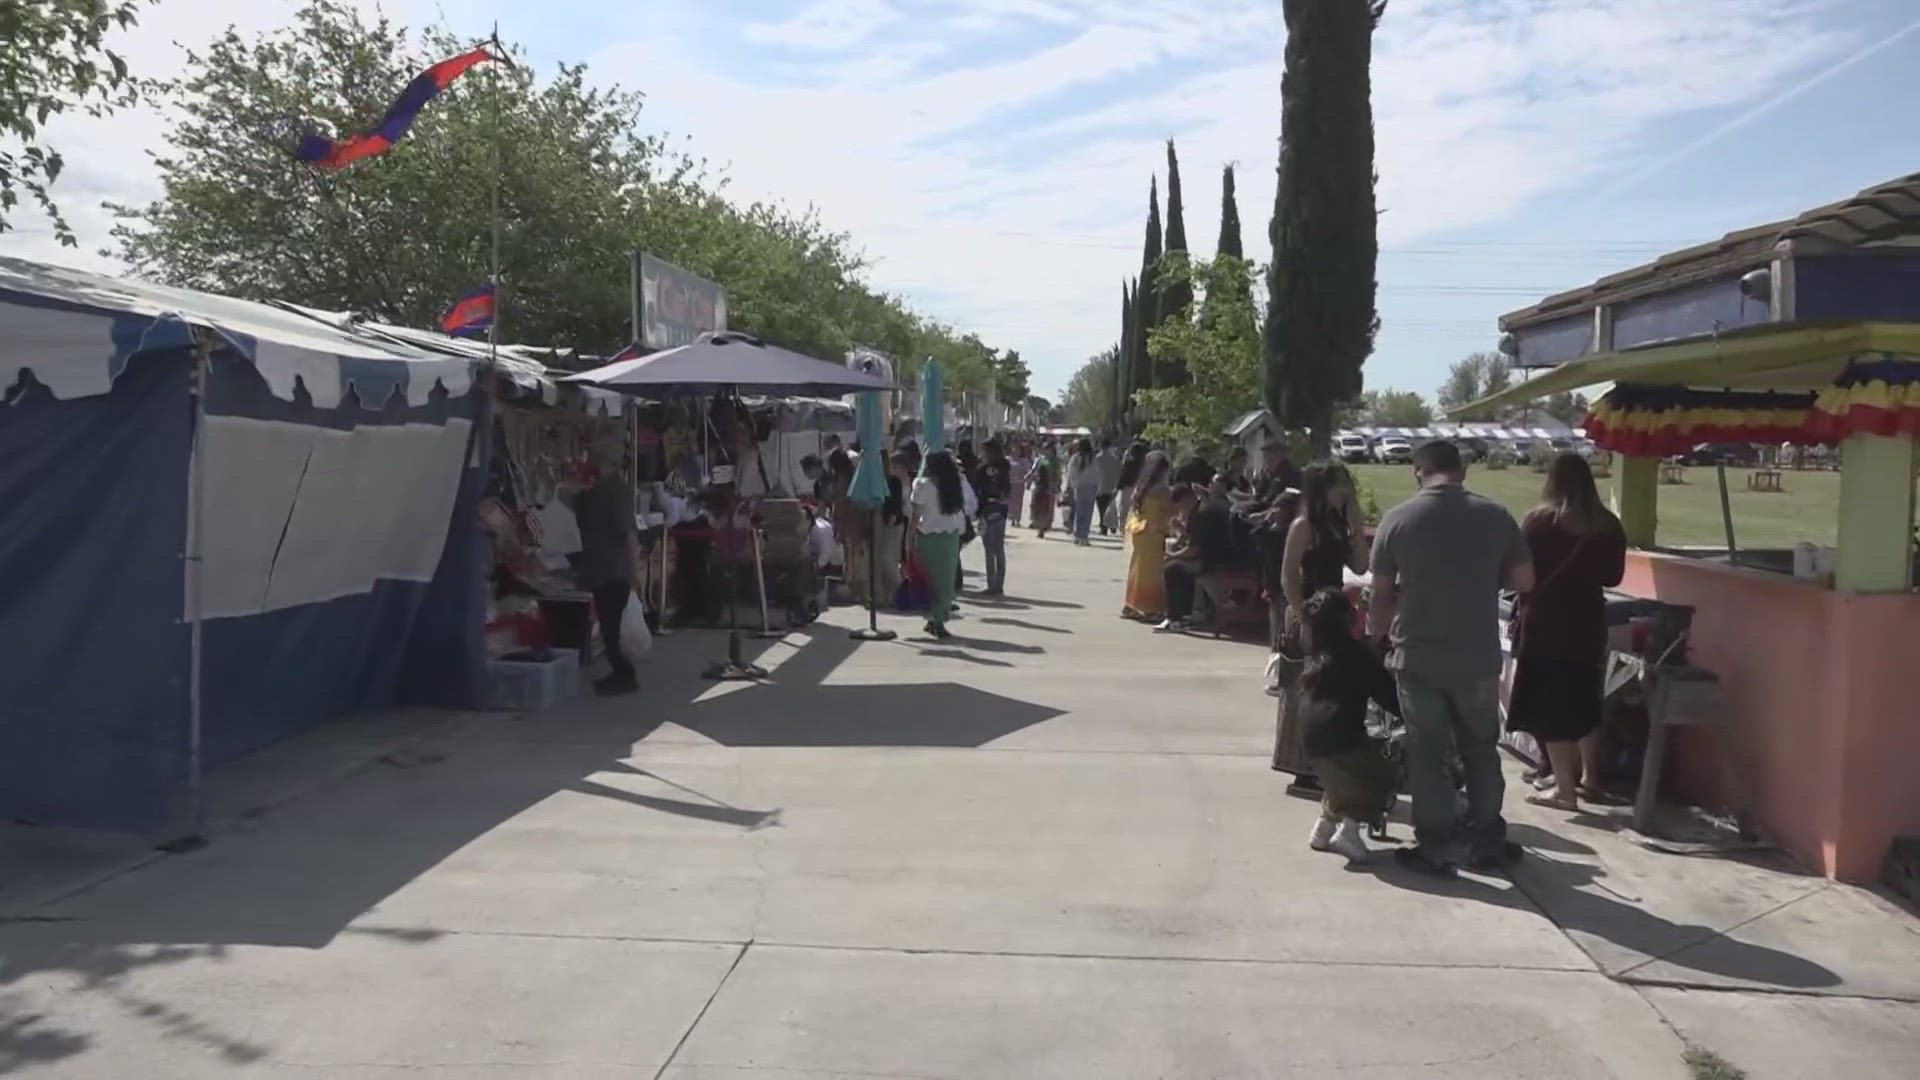 Rain or shine, multiple events are bringing business, bucks and people to Stockton and Sacramento.